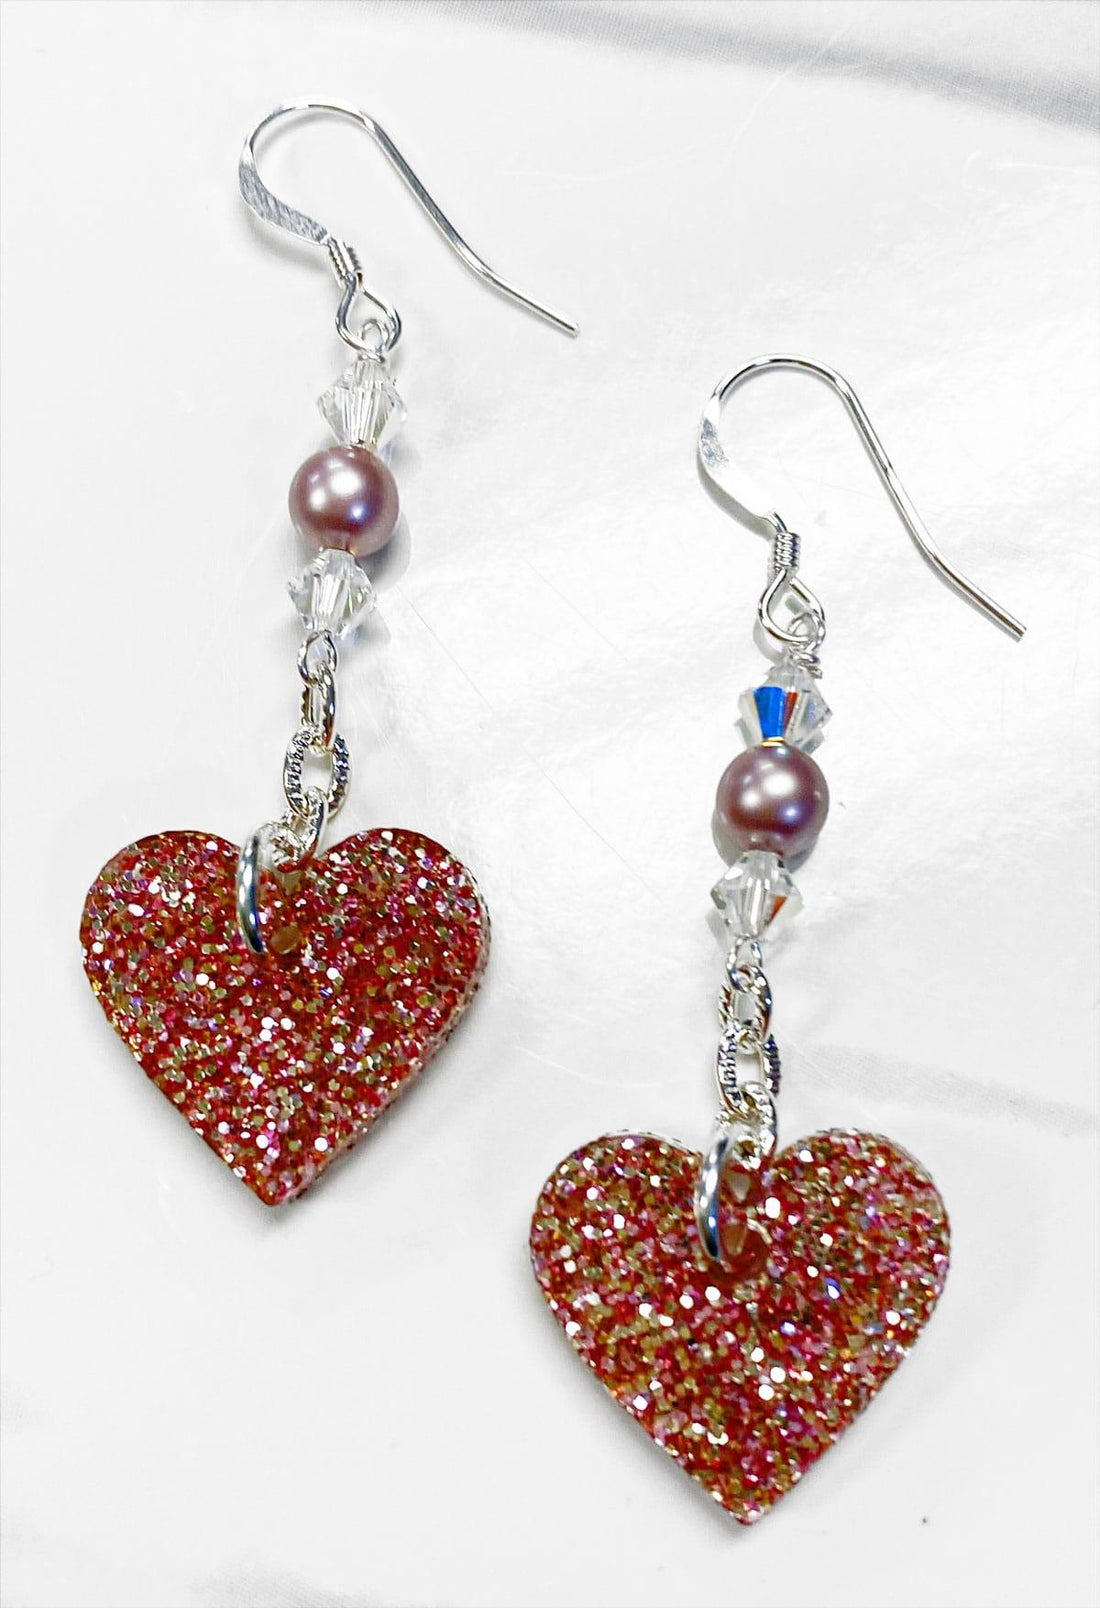 Power Rose Earring Kit Instructions - Too Cute Beads